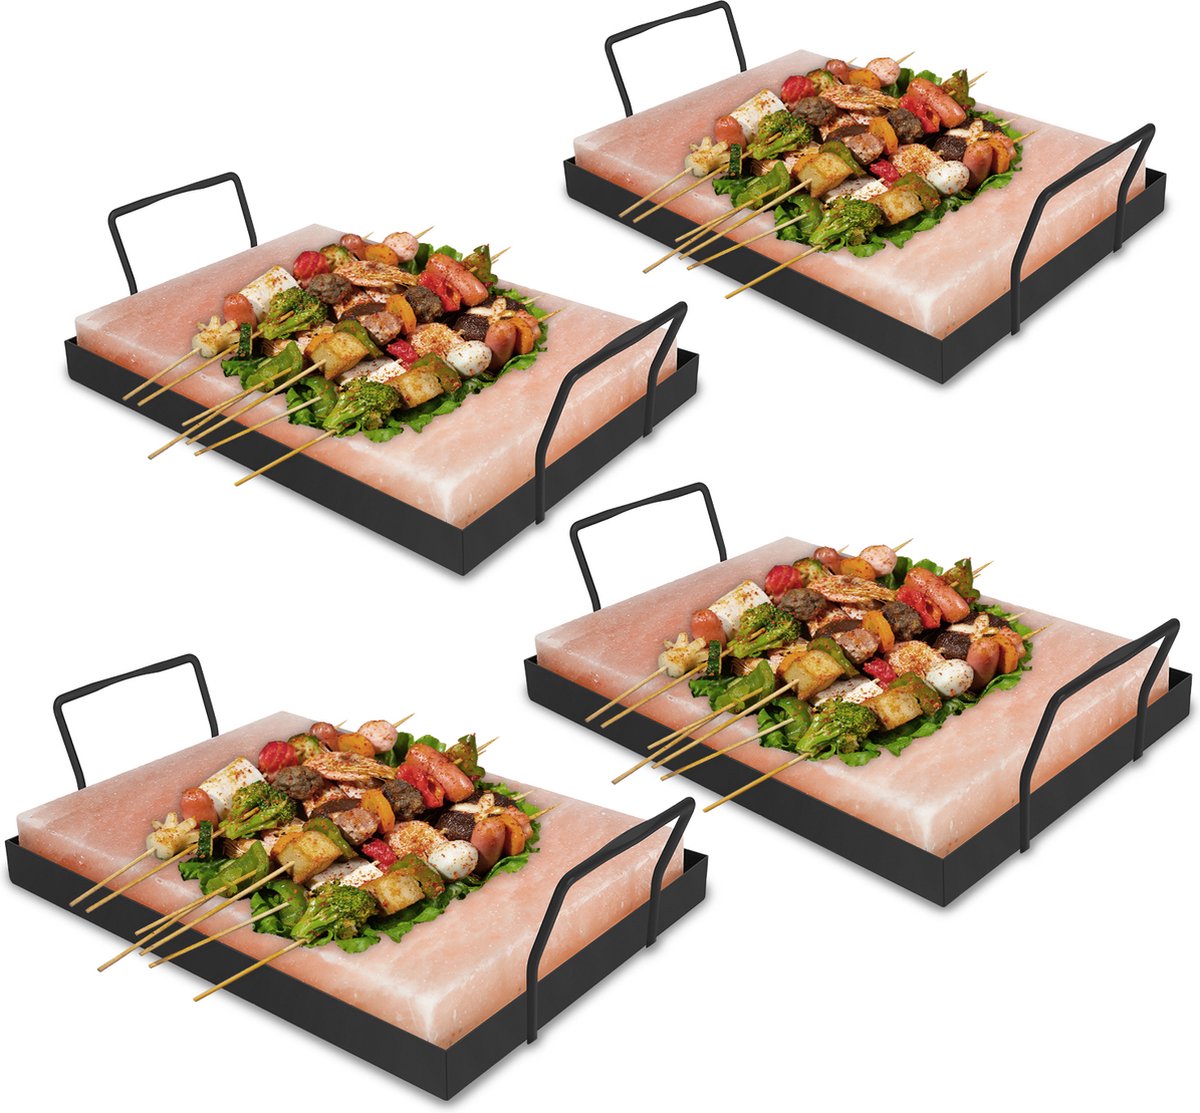 Zoutsteen BBQ Accessoire Zout TILE 20 cm x 30 cm x 3 cm (With Iron Stand BBQ Slab) 4X